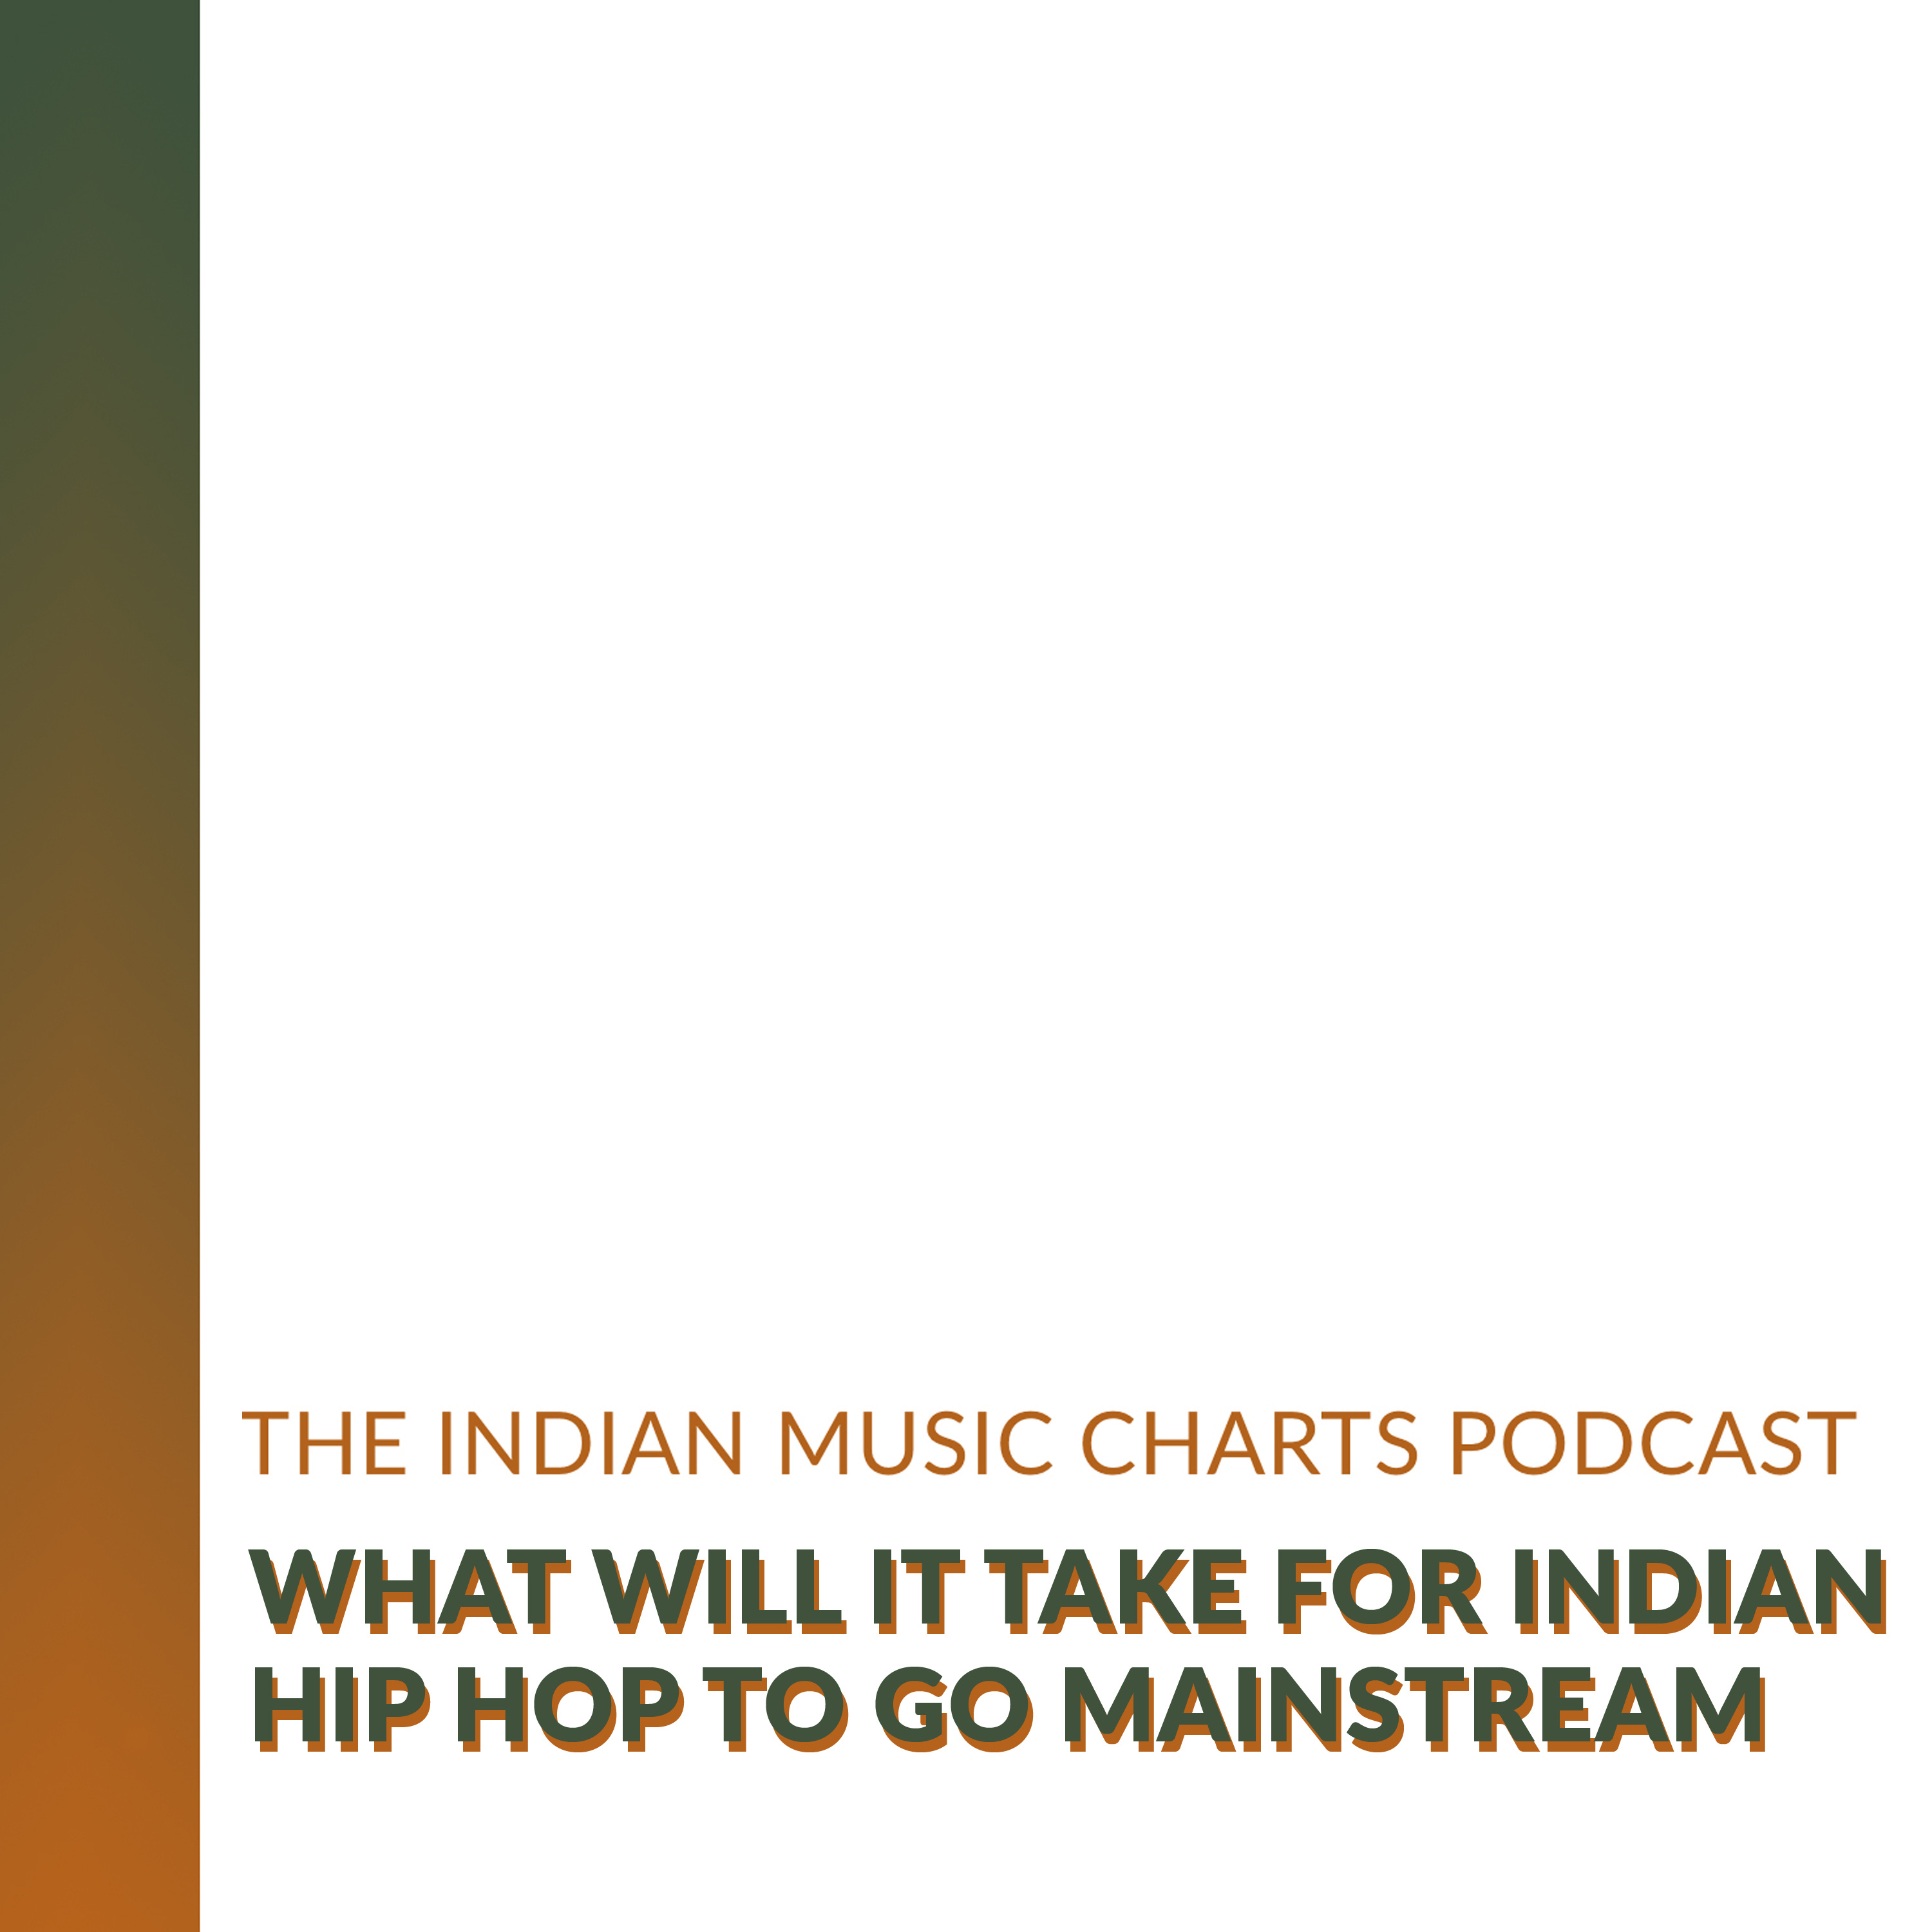 What will it take for Indian hip hop to go mainstream?